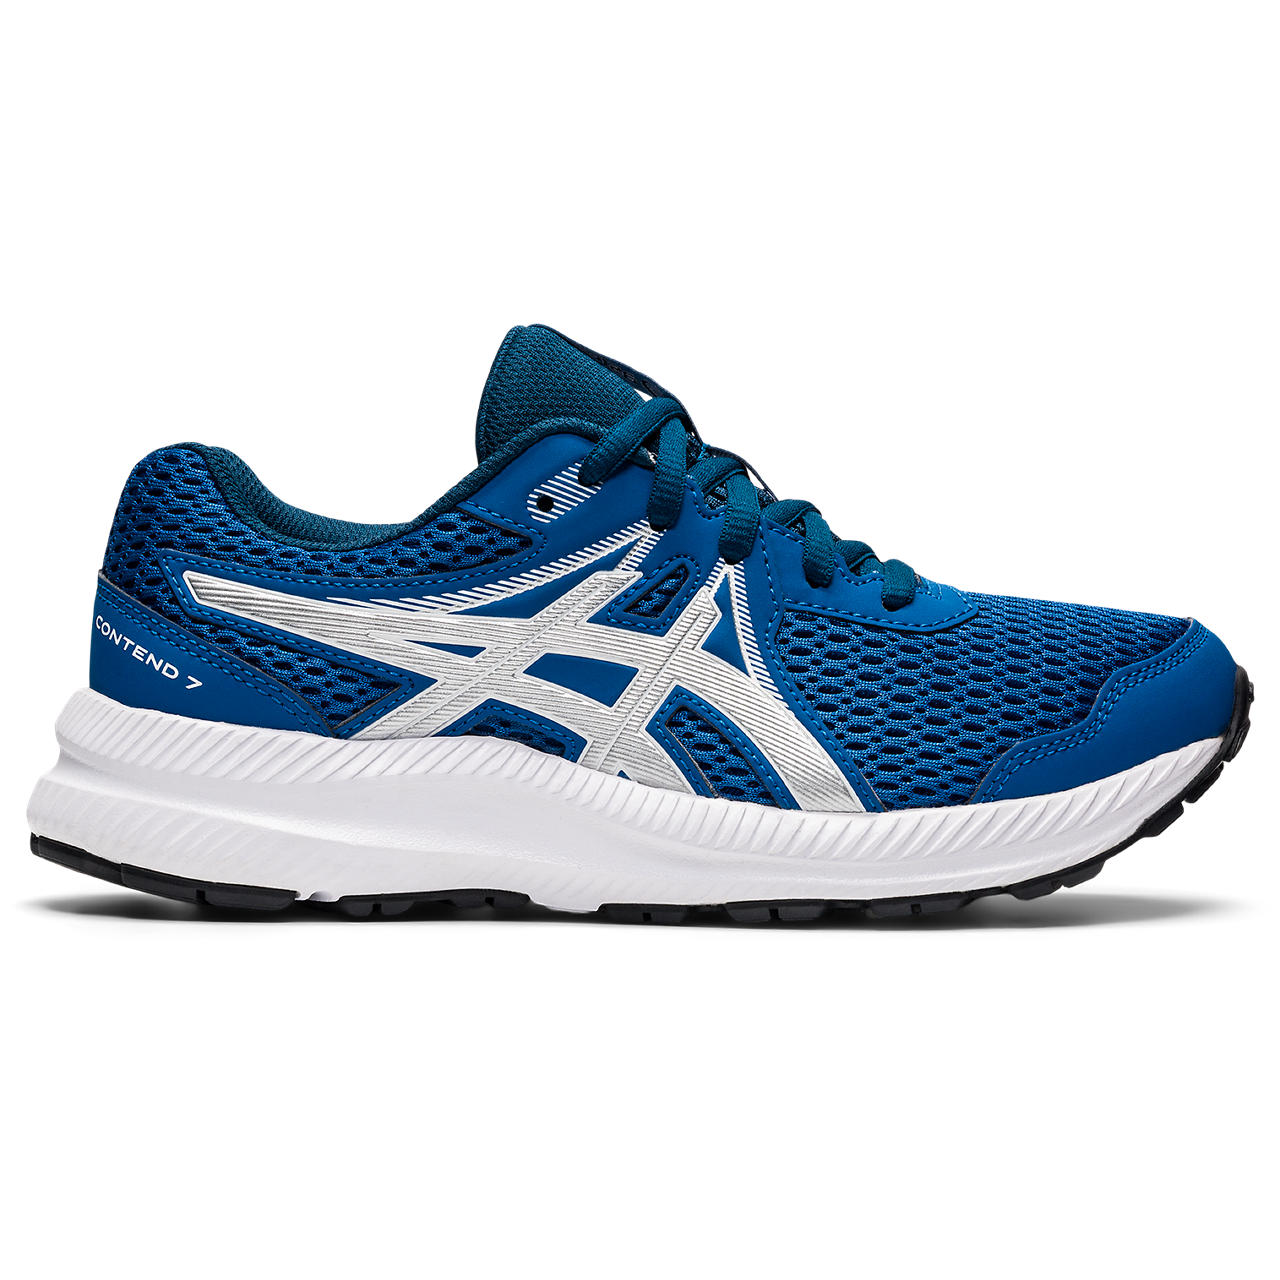 ASICS CONTEND 7 GS, LAKE DRIVE/PURE SILVER, swatch